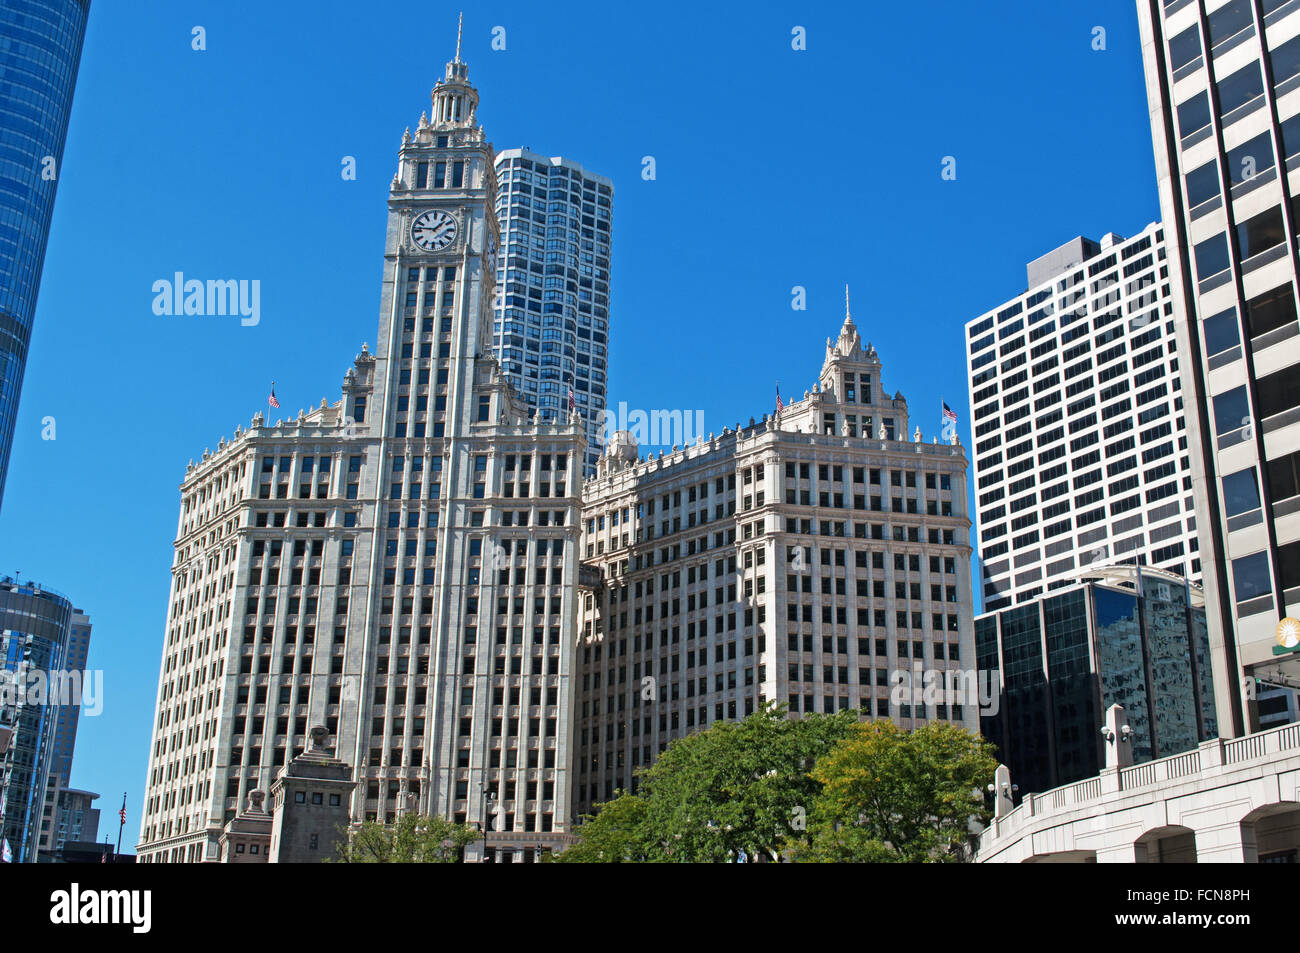 Chicago, Illinois, Usa: canal cruise on the Chicago River, view of the Wrigley Building, iconic skyscraper and headquarters of the Wrigley Company Stock Photo